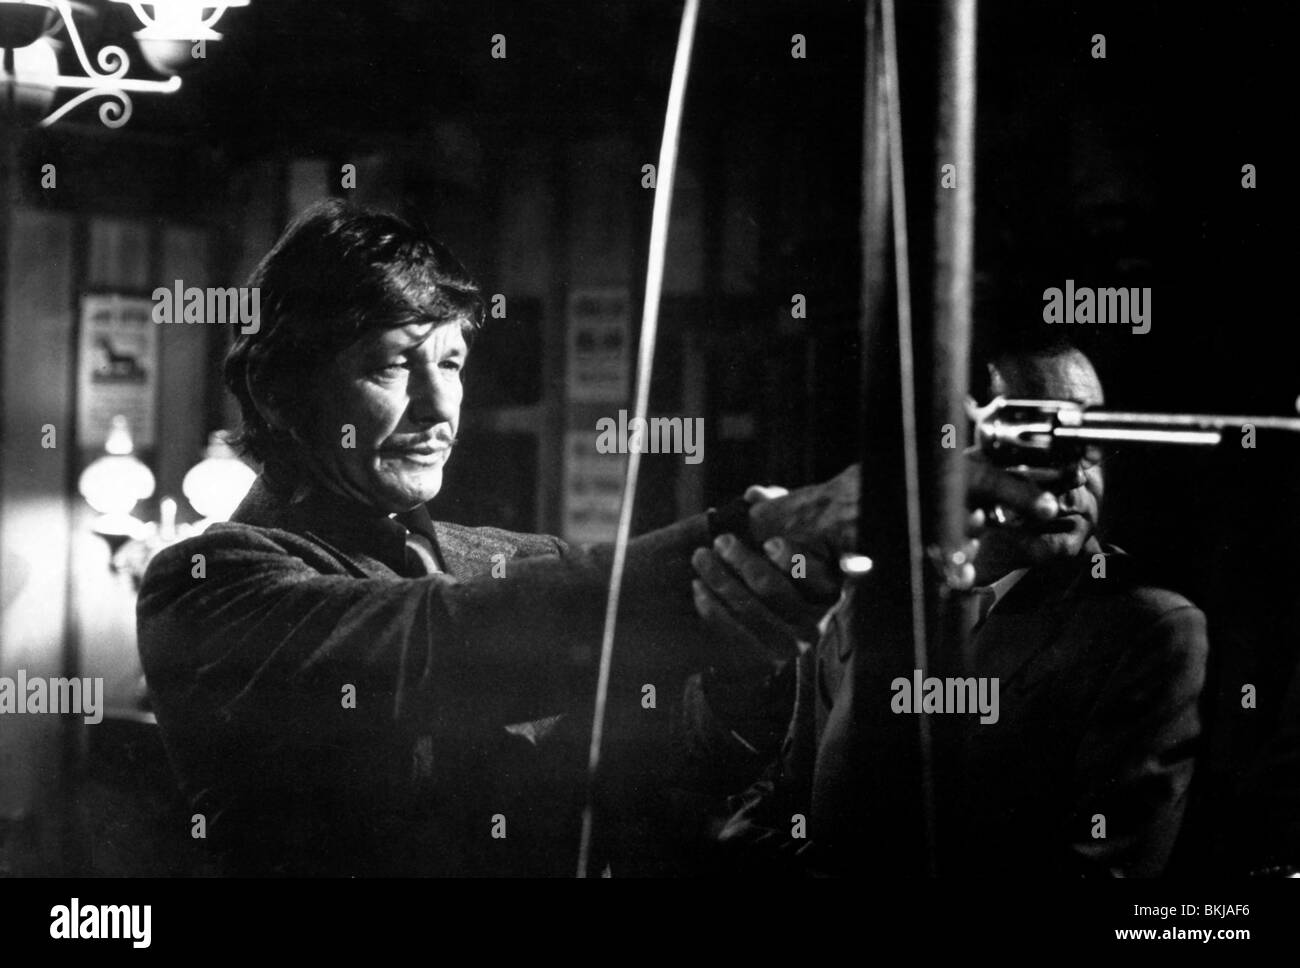 DEATH WISH (1974) CHARLES BRONSON DTWH 005P Stock Photo